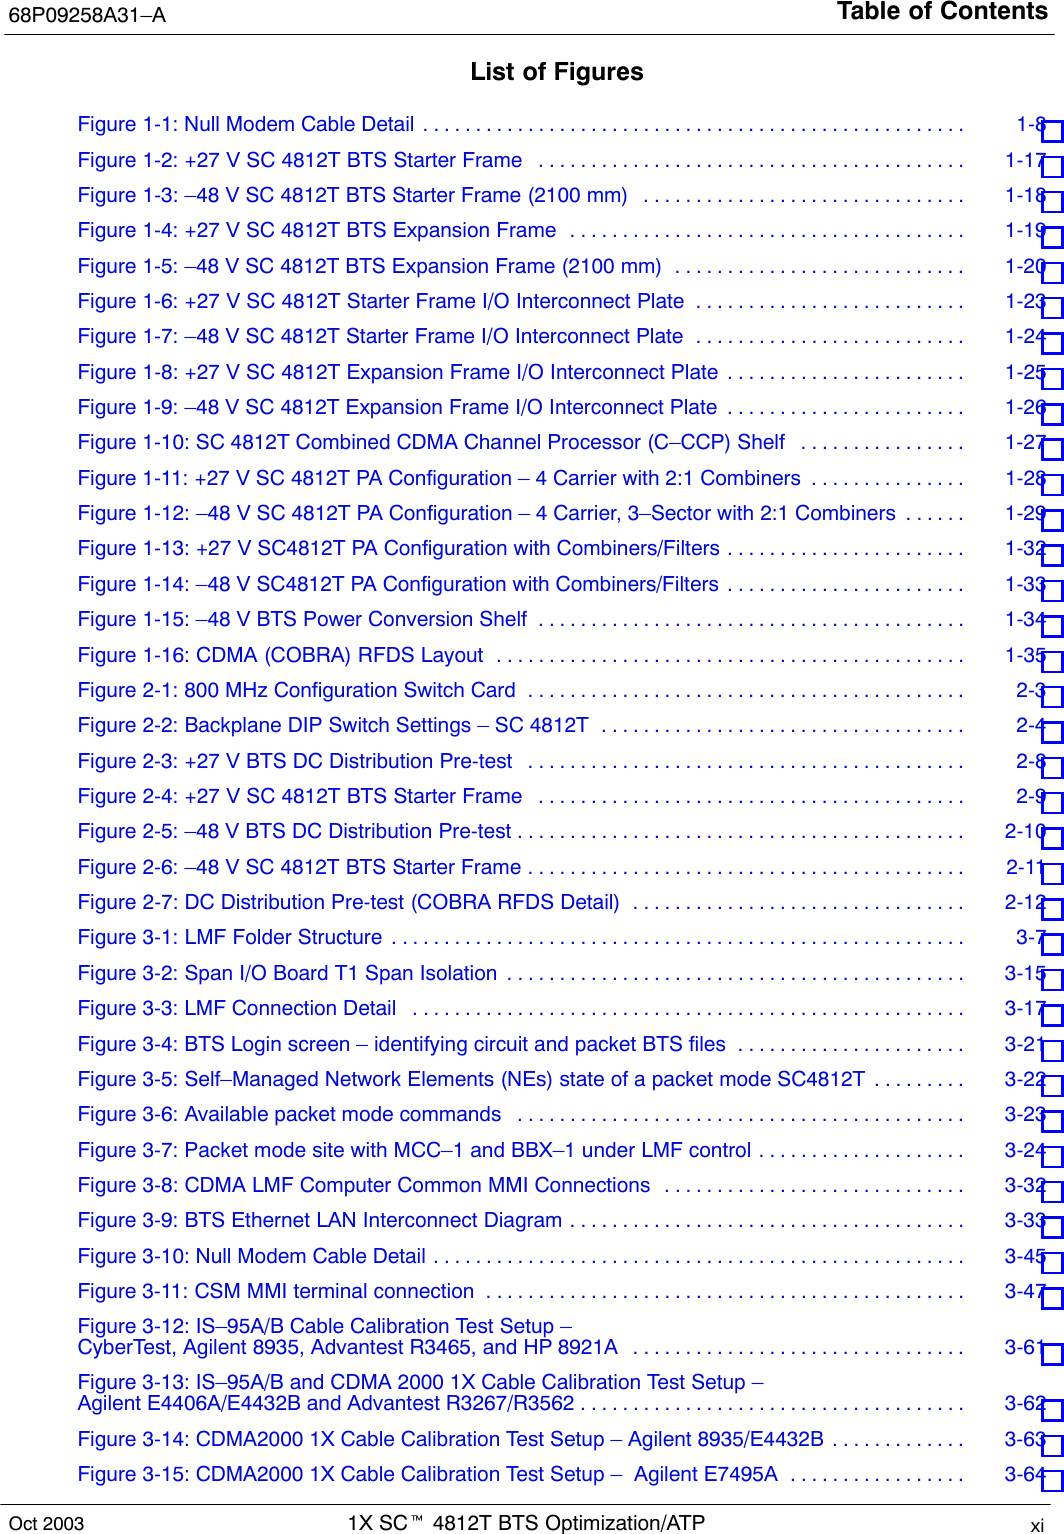 Table of Contents68P09258A31–A1X SCt 4812T BTS Optimization/ATP xiOct 2003List of FiguresFigure 1-1: Null Modem Cable Detail 1-8 . . . . . . . . . . . . . . . . . . . . . . . . . . . . . . . . . . . . . . . . . . . . . . . . . . . . Figure 1-2: +27 V SC 4812T BTS Starter Frame 1-17 . . . . . . . . . . . . . . . . . . . . . . . . . . . . . . . . . . . . . . . . . Figure 1-3: –48 V SC 4812T BTS Starter Frame (2100 mm) 1-18 . . . . . . . . . . . . . . . . . . . . . . . . . . . . . . . Figure 1-4: +27 V SC 4812T BTS Expansion Frame 1-19 . . . . . . . . . . . . . . . . . . . . . . . . . . . . . . . . . . . . . . Figure 1-5: –48 V SC 4812T BTS Expansion Frame (2100 mm) 1-20 . . . . . . . . . . . . . . . . . . . . . . . . . . . . Figure 1-6: +27 V SC 4812T Starter Frame I/O Interconnect Plate 1-23 . . . . . . . . . . . . . . . . . . . . . . . . . . Figure 1-7: –48 V SC 4812T Starter Frame I/O Interconnect Plate 1-24 . . . . . . . . . . . . . . . . . . . . . . . . . . Figure 1-8: +27 V SC 4812T Expansion Frame I/O Interconnect Plate 1-25 . . . . . . . . . . . . . . . . . . . . . . . Figure 1-9: –48 V SC 4812T Expansion Frame I/O Interconnect Plate 1-26 . . . . . . . . . . . . . . . . . . . . . . . Figure 1-10: SC 4812T Combined CDMA Channel Processor (C–CCP) Shelf 1-27 . . . . . . . . . . . . . . . . Figure 1-11: +27 V SC 4812T PA Configuration – 4 Carrier with 2:1 Combiners 1-28 . . . . . . . . . . . . . . . Figure 1-12: –48 V SC 4812T PA Configuration – 4 Carrier, 3–Sector with 2:1 Combiners 1-29 . . . . . . Figure 1-13: +27 V SC4812T PA Configuration with Combiners/Filters 1-32 . . . . . . . . . . . . . . . . . . . . . . . Figure 1-14: –48 V SC4812T PA Configuration with Combiners/Filters 1-33 . . . . . . . . . . . . . . . . . . . . . . . Figure 1-15: –48 V BTS Power Conversion Shelf 1-34 . . . . . . . . . . . . . . . . . . . . . . . . . . . . . . . . . . . . . . . . . Figure 1-16: CDMA (COBRA) RFDS Layout 1-35 . . . . . . . . . . . . . . . . . . . . . . . . . . . . . . . . . . . . . . . . . . . . . Figure 2-1: 800 MHz Configuration Switch Card 2-3 . . . . . . . . . . . . . . . . . . . . . . . . . . . . . . . . . . . . . . . . . . Figure 2-2: Backplane DIP Switch Settings – SC 4812T 2-4 . . . . . . . . . . . . . . . . . . . . . . . . . . . . . . . . . . . Figure 2-3: +27 V BTS DC Distribution Pre-test 2-8 . . . . . . . . . . . . . . . . . . . . . . . . . . . . . . . . . . . . . . . . . . Figure 2-4: +27 V SC 4812T BTS Starter Frame 2-9 . . . . . . . . . . . . . . . . . . . . . . . . . . . . . . . . . . . . . . . . . Figure 2-5: –48 V BTS DC Distribution Pre-test 2-10 . . . . . . . . . . . . . . . . . . . . . . . . . . . . . . . . . . . . . . . . . . . Figure 2-6: –48 V SC 4812T BTS Starter Frame 2-11 . . . . . . . . . . . . . . . . . . . . . . . . . . . . . . . . . . . . . . . . . . Figure 2-7: DC Distribution Pre-test (COBRA RFDS Detail) 2-12 . . . . . . . . . . . . . . . . . . . . . . . . . . . . . . . . Figure 3-1: LMF Folder Structure 3-7 . . . . . . . . . . . . . . . . . . . . . . . . . . . . . . . . . . . . . . . . . . . . . . . . . . . . . . . Figure 3-2: Span I/O Board T1 Span Isolation 3-15 . . . . . . . . . . . . . . . . . . . . . . . . . . . . . . . . . . . . . . . . . . . . Figure 3-3: LMF Connection Detail 3-17 . . . . . . . . . . . . . . . . . . . . . . . . . . . . . . . . . . . . . . . . . . . . . . . . . . . . . Figure 3-4: BTS Login screen – identifying circuit and packet BTS files 3-21 . . . . . . . . . . . . . . . . . . . . . . Figure 3-5: Self–Managed Network Elements (NEs) state of a packet mode SC4812T 3-22 . . . . . . . . . Figure 3-6: Available packet mode commands 3-23 . . . . . . . . . . . . . . . . . . . . . . . . . . . . . . . . . . . . . . . . . . . Figure 3-7: Packet mode site with MCC–1 and BBX–1 under LMF control 3-24 . . . . . . . . . . . . . . . . . . . . Figure 3-8: CDMA LMF Computer Common MMI Connections 3-32 . . . . . . . . . . . . . . . . . . . . . . . . . . . . . Figure 3-9: BTS Ethernet LAN Interconnect Diagram 3-33 . . . . . . . . . . . . . . . . . . . . . . . . . . . . . . . . . . . . . . Figure 3-10: Null Modem Cable Detail 3-45 . . . . . . . . . . . . . . . . . . . . . . . . . . . . . . . . . . . . . . . . . . . . . . . . . . . Figure 3-11: CSM MMI terminal connection 3-47 . . . . . . . . . . . . . . . . . . . . . . . . . . . . . . . . . . . . . . . . . . . . . . Figure 3-12: IS–95A/B Cable Calibration Test Setup – CyberTest, Agilent 8935, Advantest R3465, and HP 8921A 3-61 . . . . . . . . . . . . . . . . . . . . . . . . . . . . . . . . Figure 3-13: IS–95A/B and CDMA 2000 1X Cable Calibration Test Setup –Agilent E4406A/E4432B and Advantest R3267/R3562 3-62 . . . . . . . . . . . . . . . . . . . . . . . . . . . . . . . . . . . . . Figure 3-14: CDMA2000 1X Cable Calibration Test Setup – Agilent 8935/E4432B 3-63 . . . . . . . . . . . . . Figure 3-15: CDMA2000 1X Cable Calibration Test Setup –  Agilent E7495A 3-64 . . . . . . . . . . . . . . . . . 